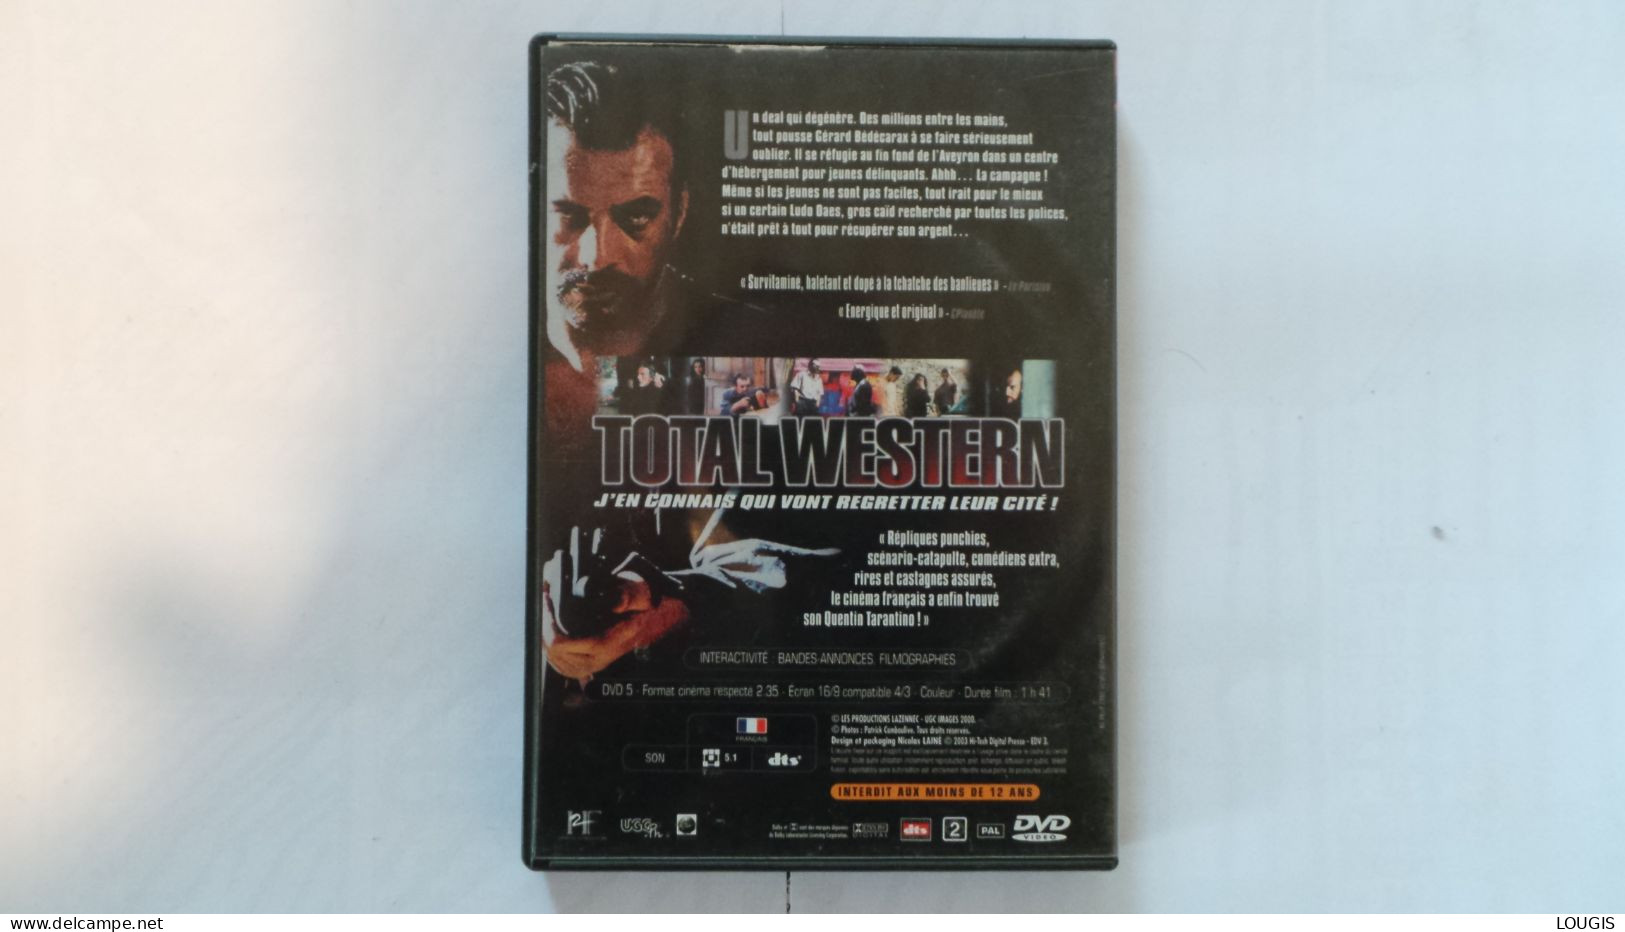 TOTAL WESTERN - Action, Adventure